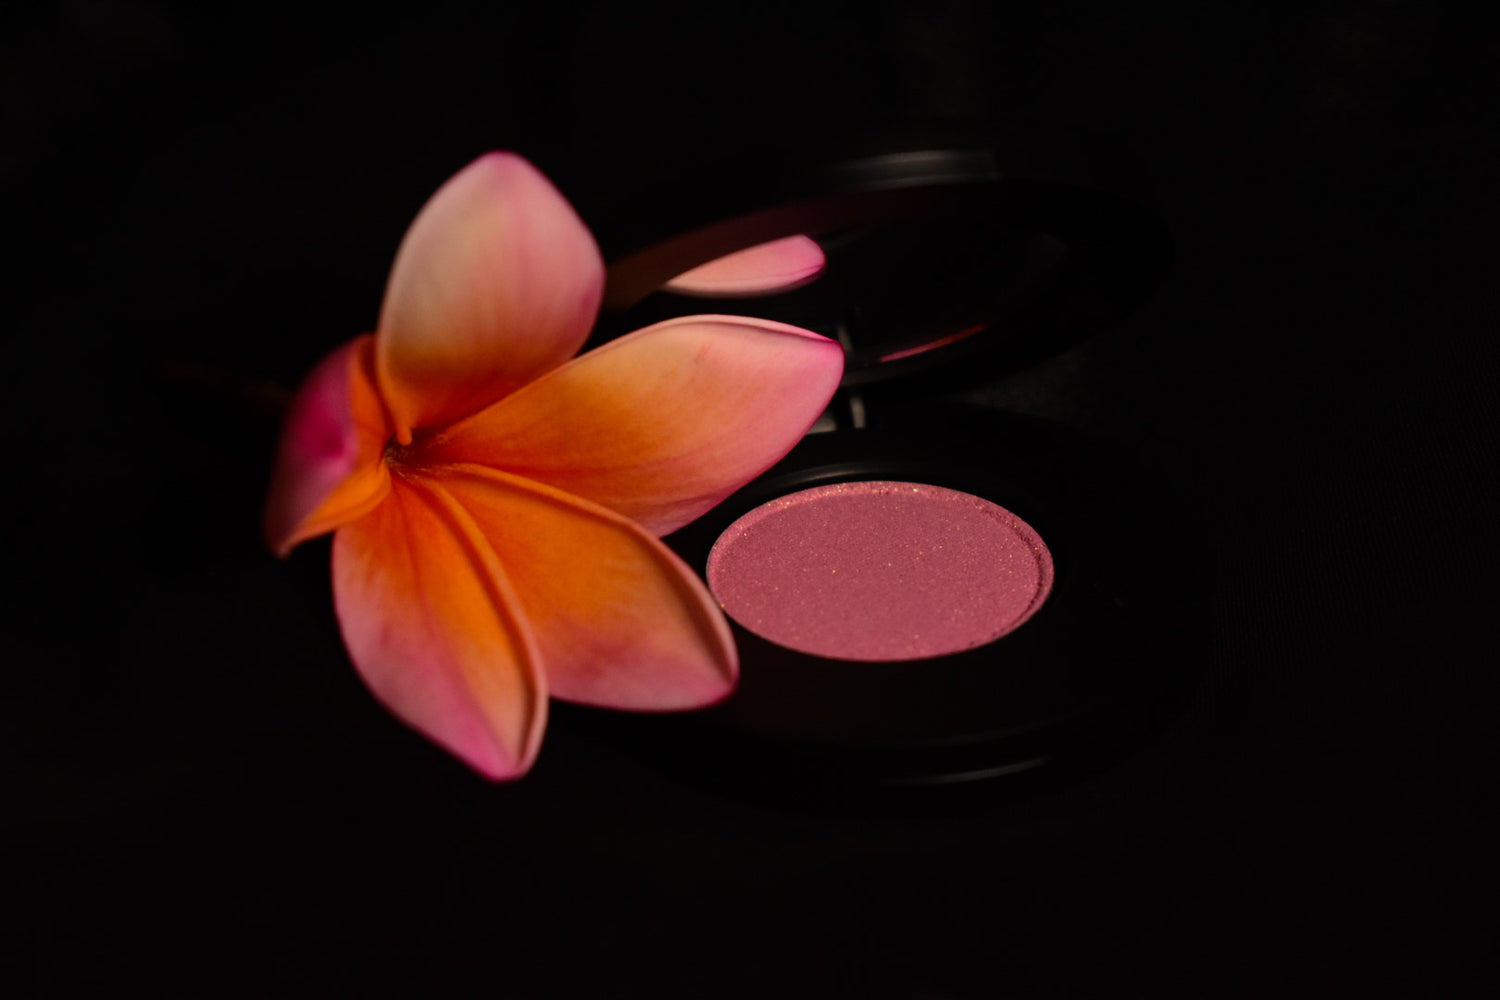 Shop our pressed single eyeshadows like this one-Pink Plumeria inspired by the natural beauty of Hawaii's Pink Plumeria blooms